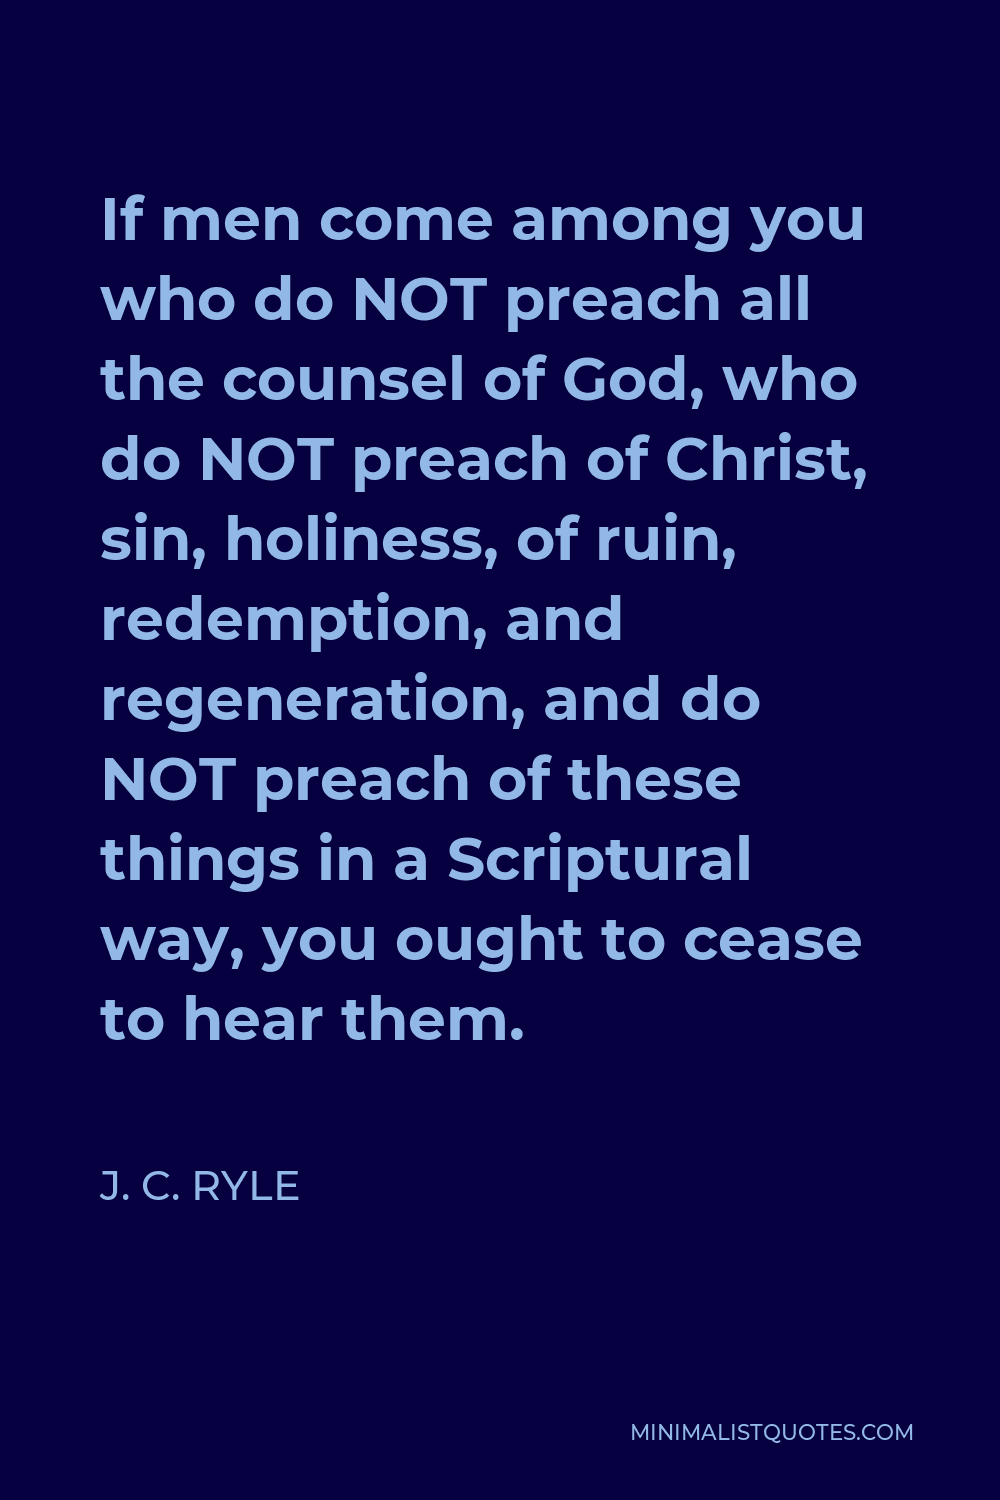 J. C. Ryle Quote - If men come among you who do NOT preach all the counsel of God, who do NOT preach of Christ, sin, holiness, of ruin, redemption, and regeneration, and do NOT preach of these things in a Scriptural way, you ought to cease to hear them.